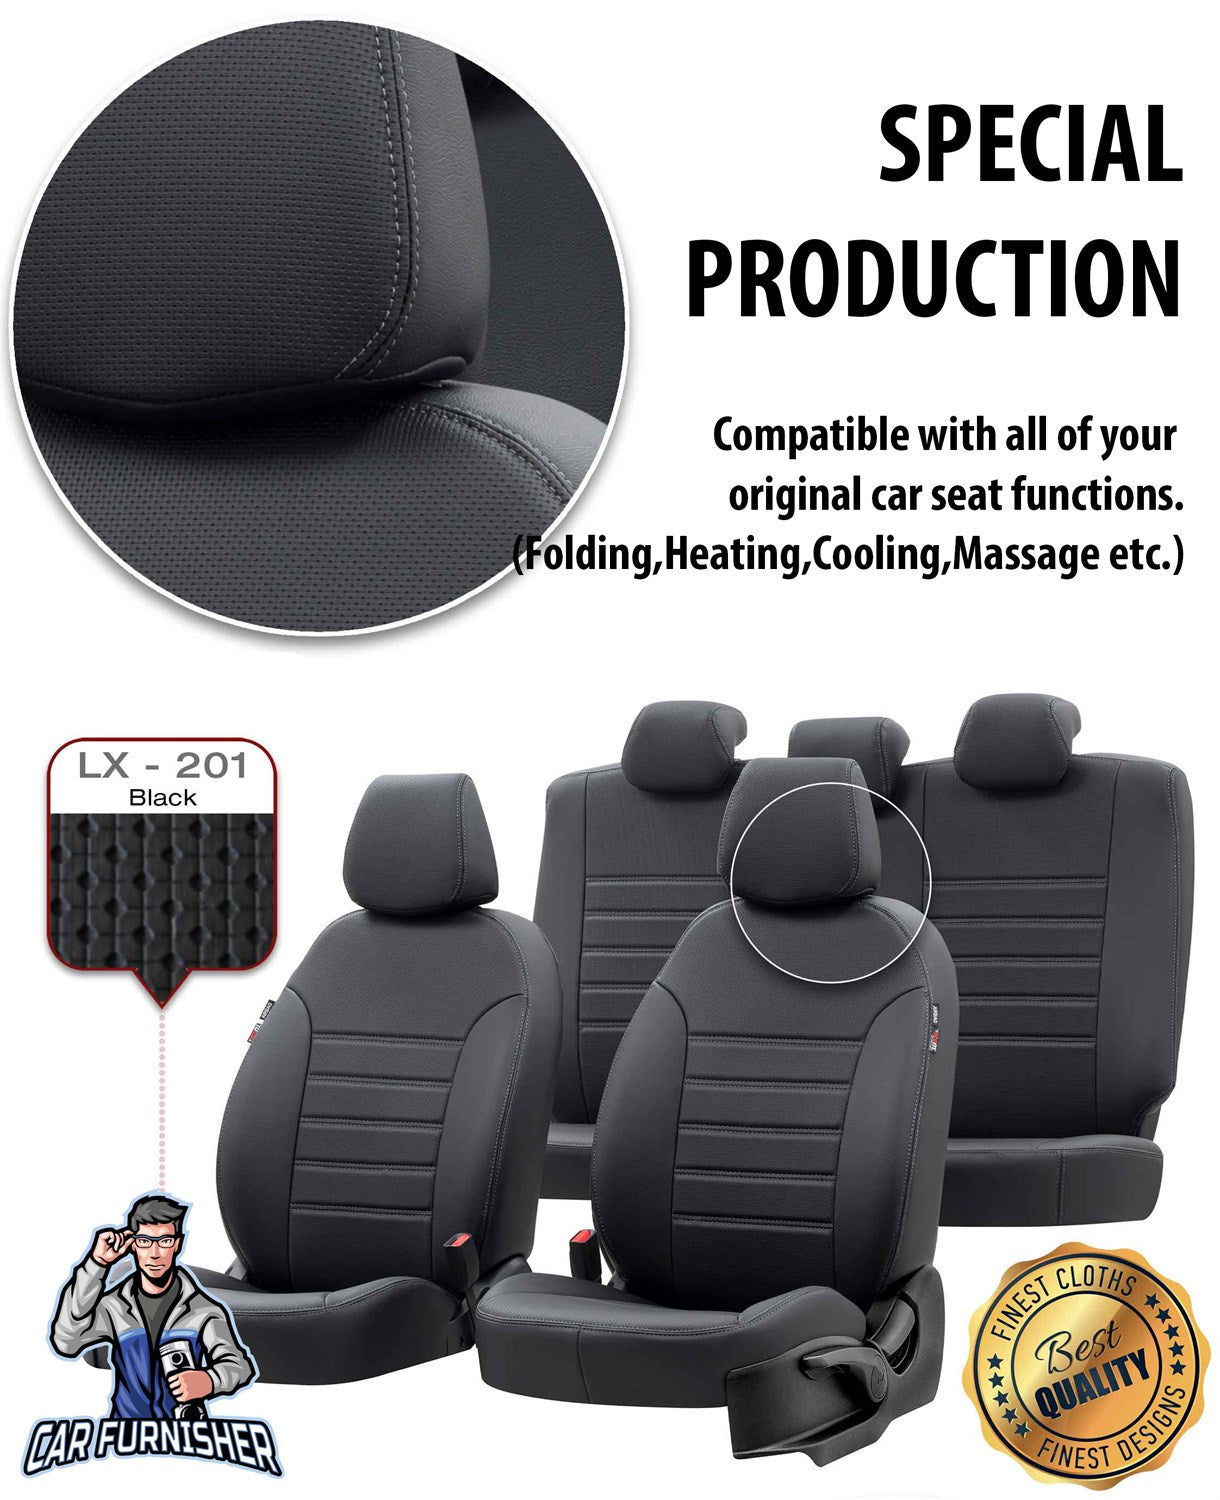 Peugeot 107 Seat Covers New York Leather Design Smoked Black Leather